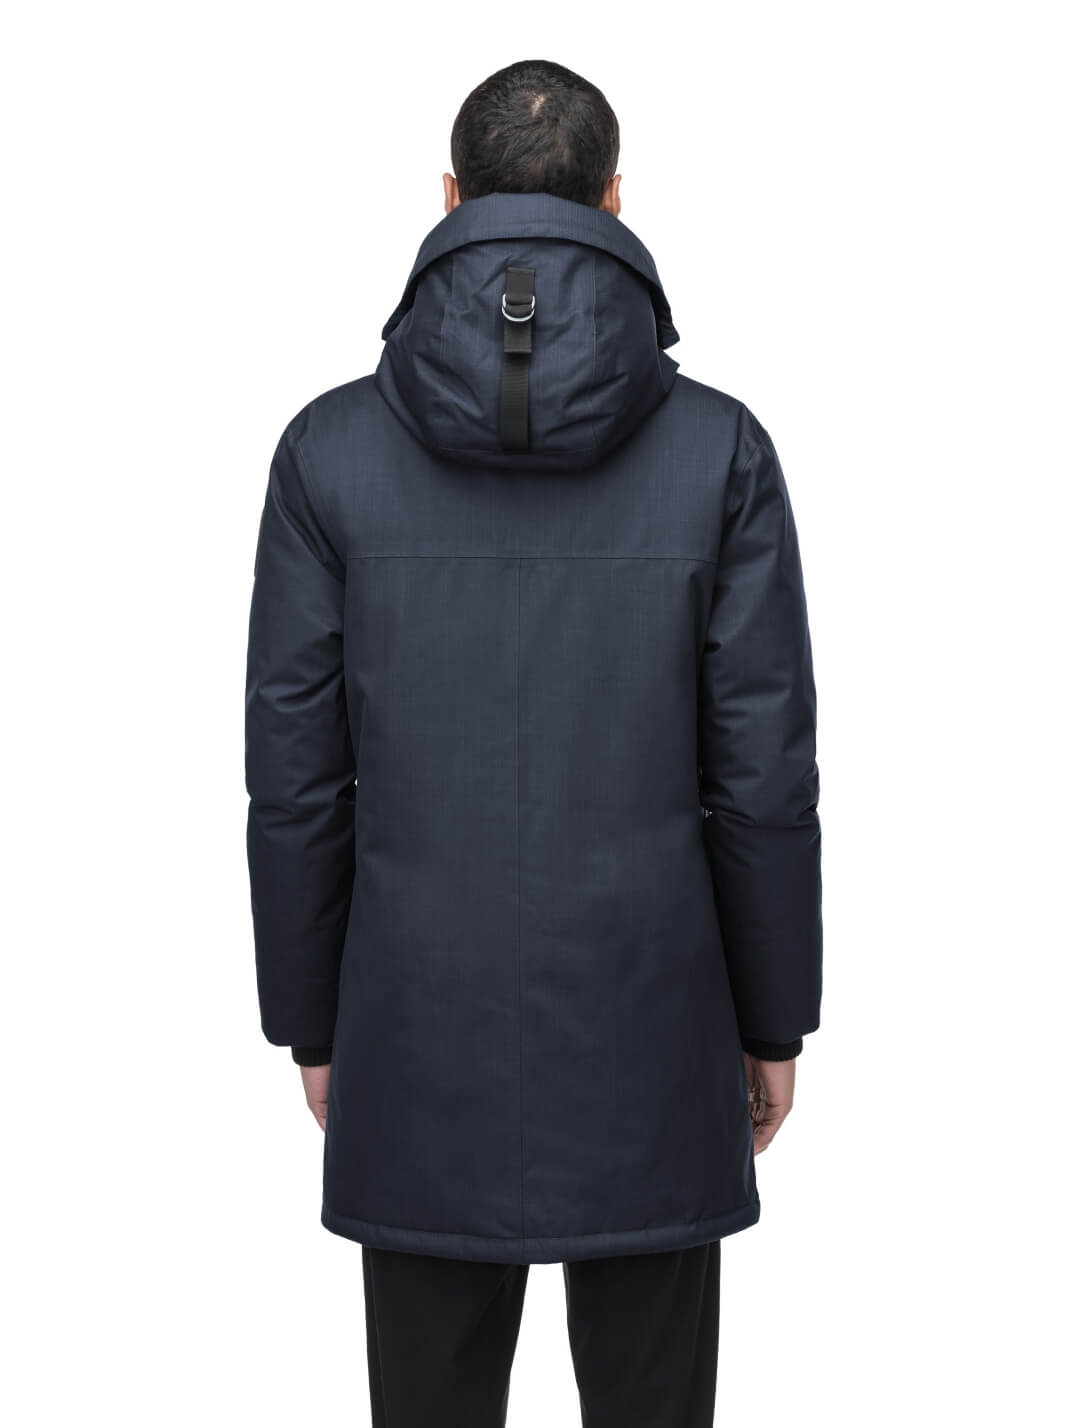 Yves Furless Men's Parka in thigh length, Canadian white duck down insulation, non-removable down-filled hood, flap pockets at waist, centre-front two-way zipper with magnetic wind flap, and elastic ribbed cuffs, in CH Navy